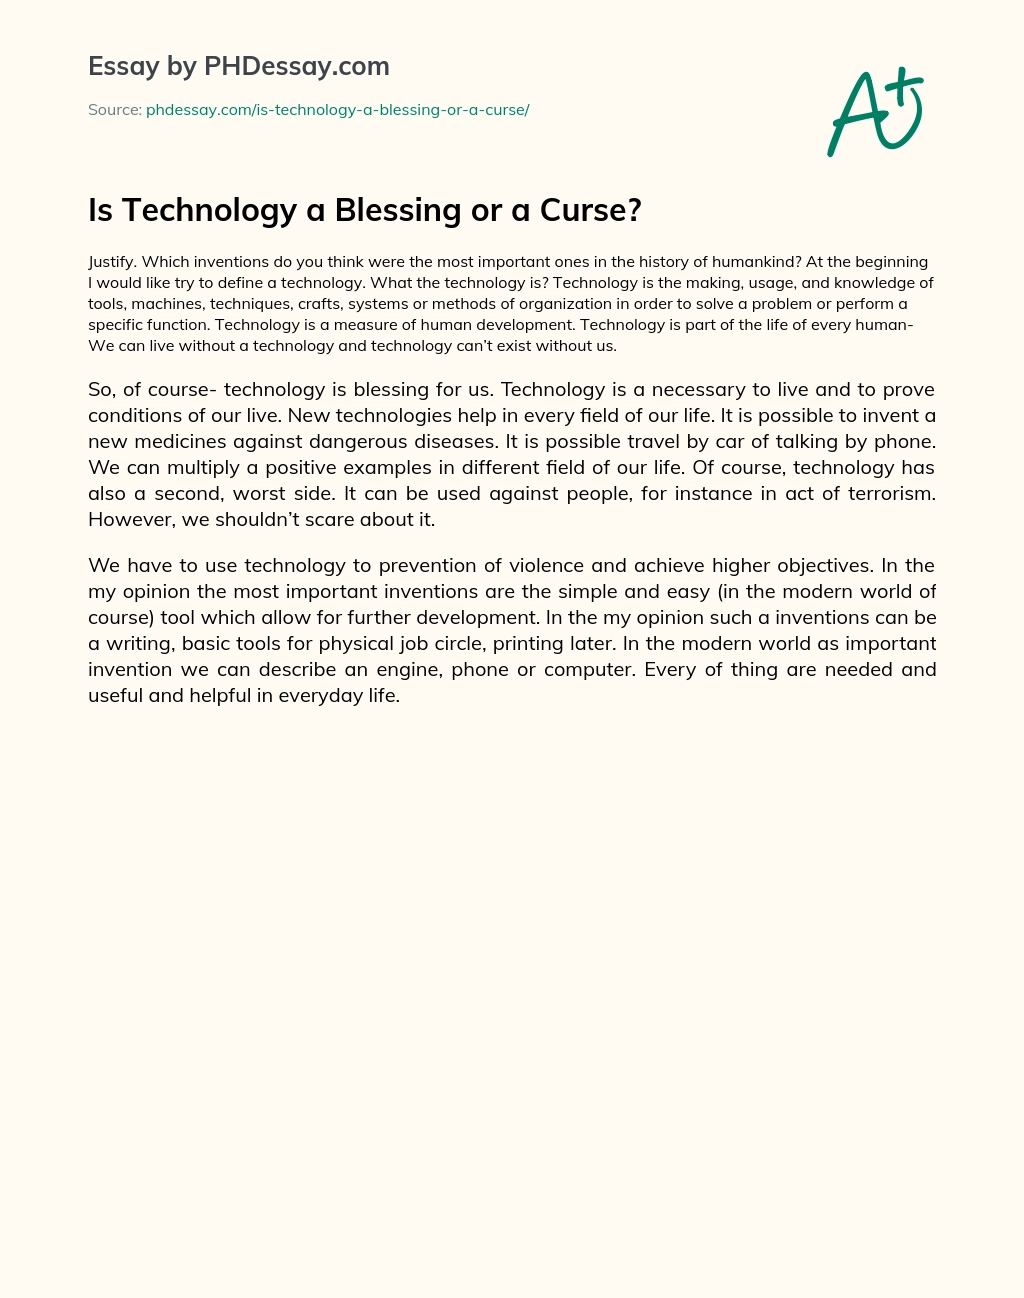 Is Technology a Blessing or a Curse? essay